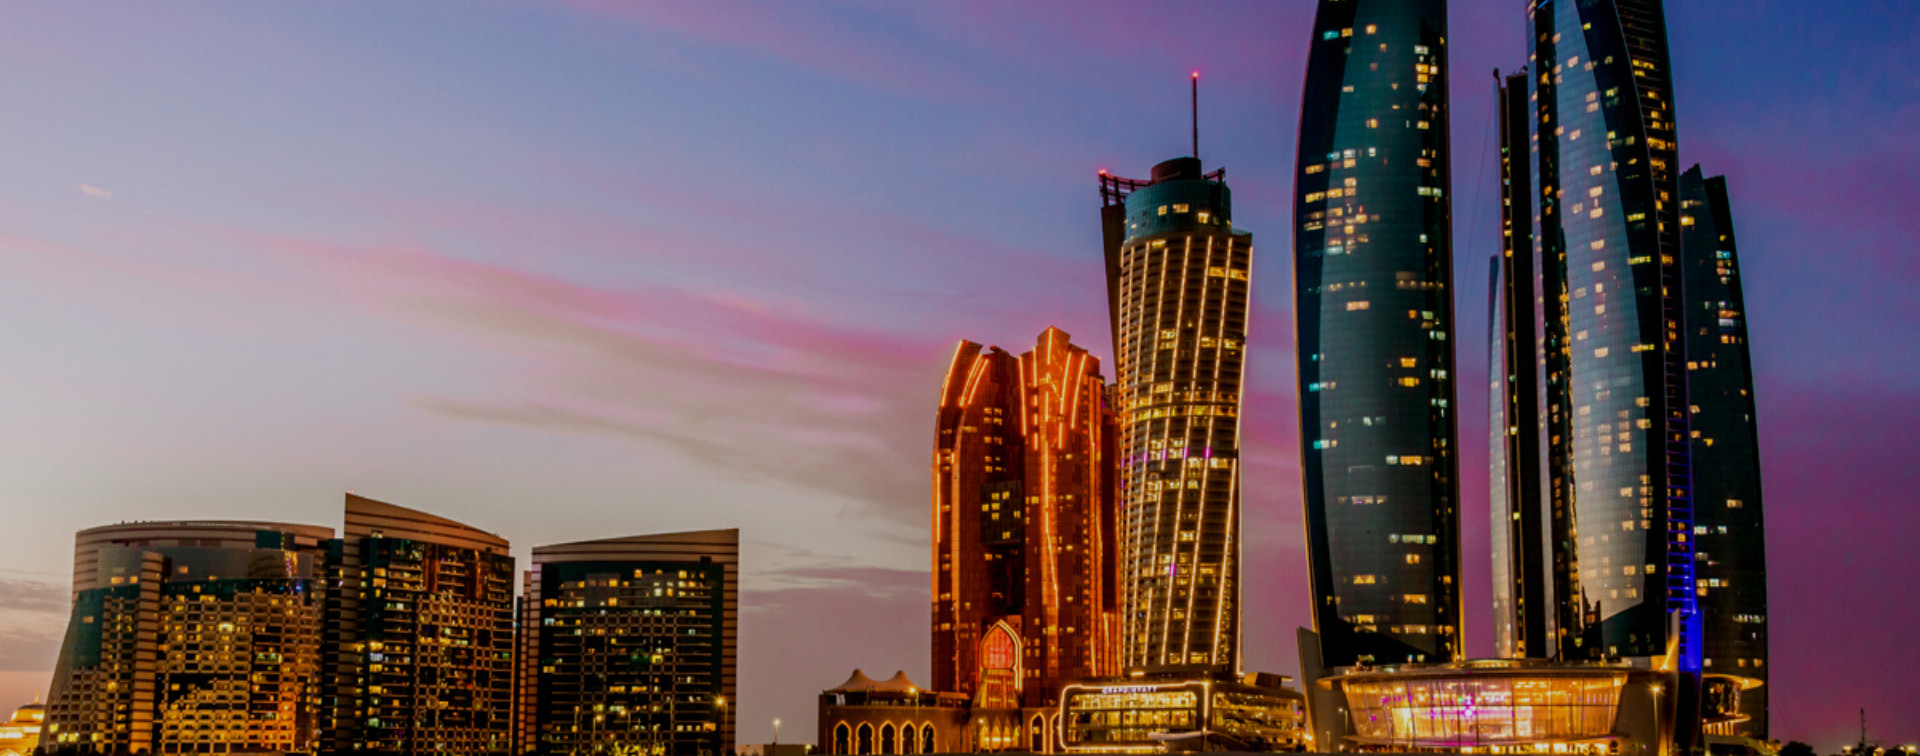 Company Formation And Business Setup In Abu Dhabi Free Zones